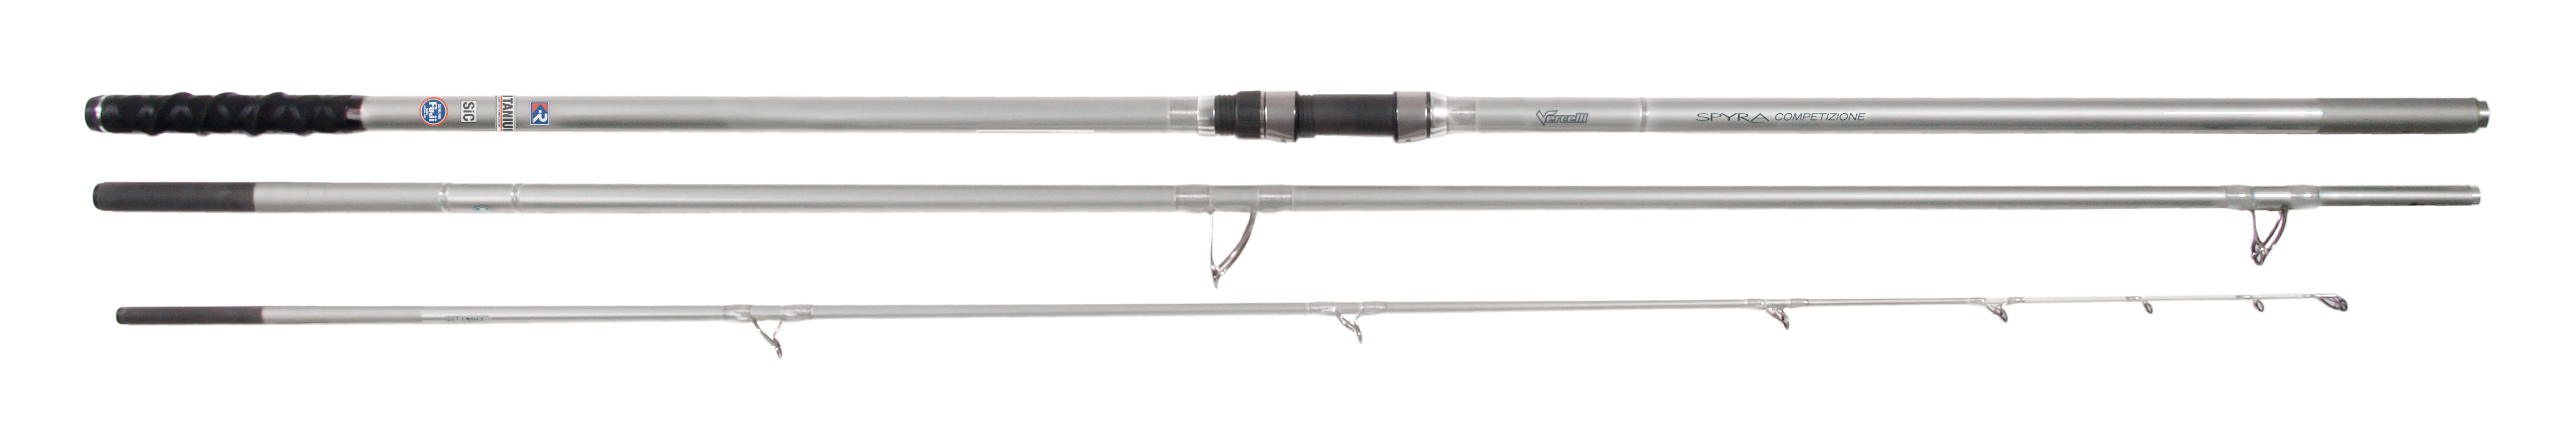 A look at the new Vercelli rods for 2016 - Tronix Fishing